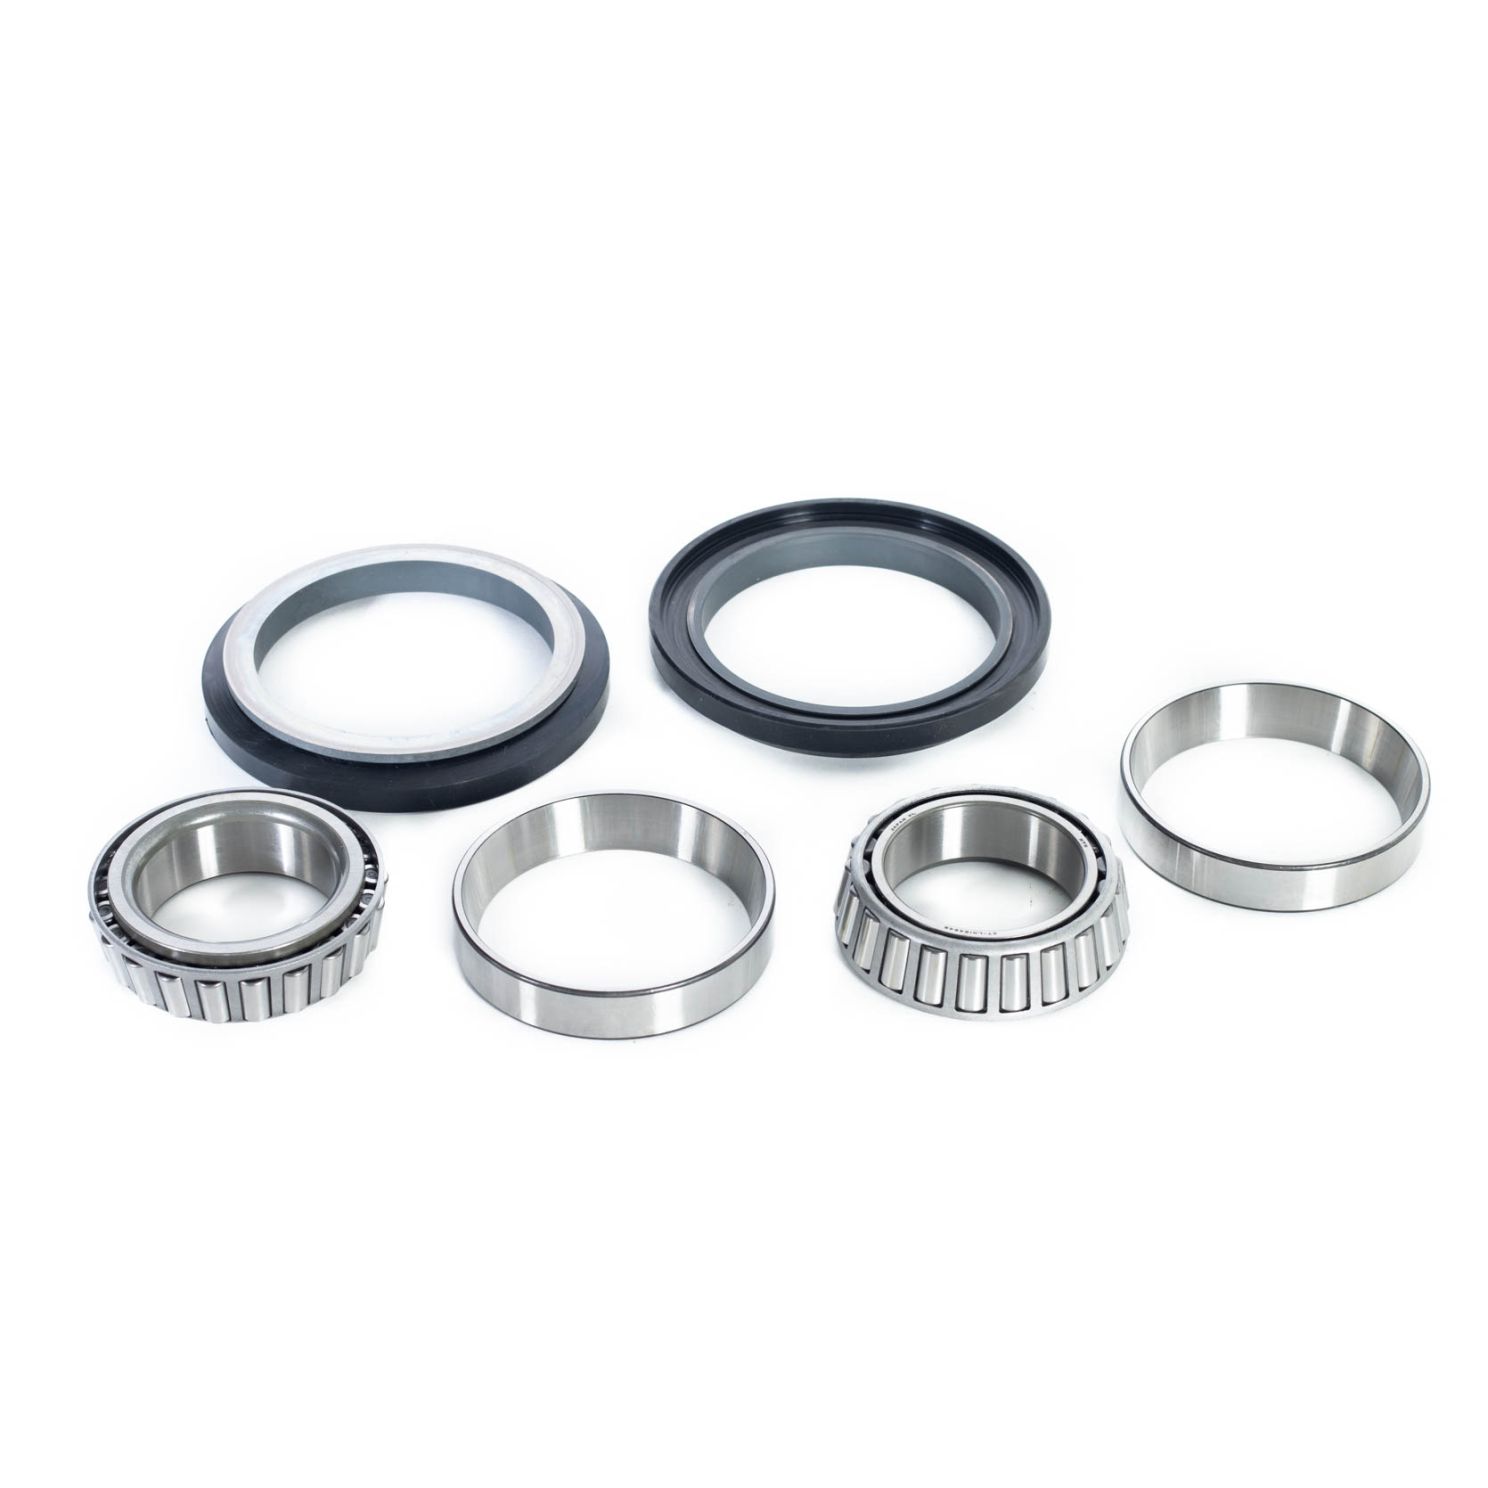 8000T Series Track Tractor Mid Roller Bearing Kit